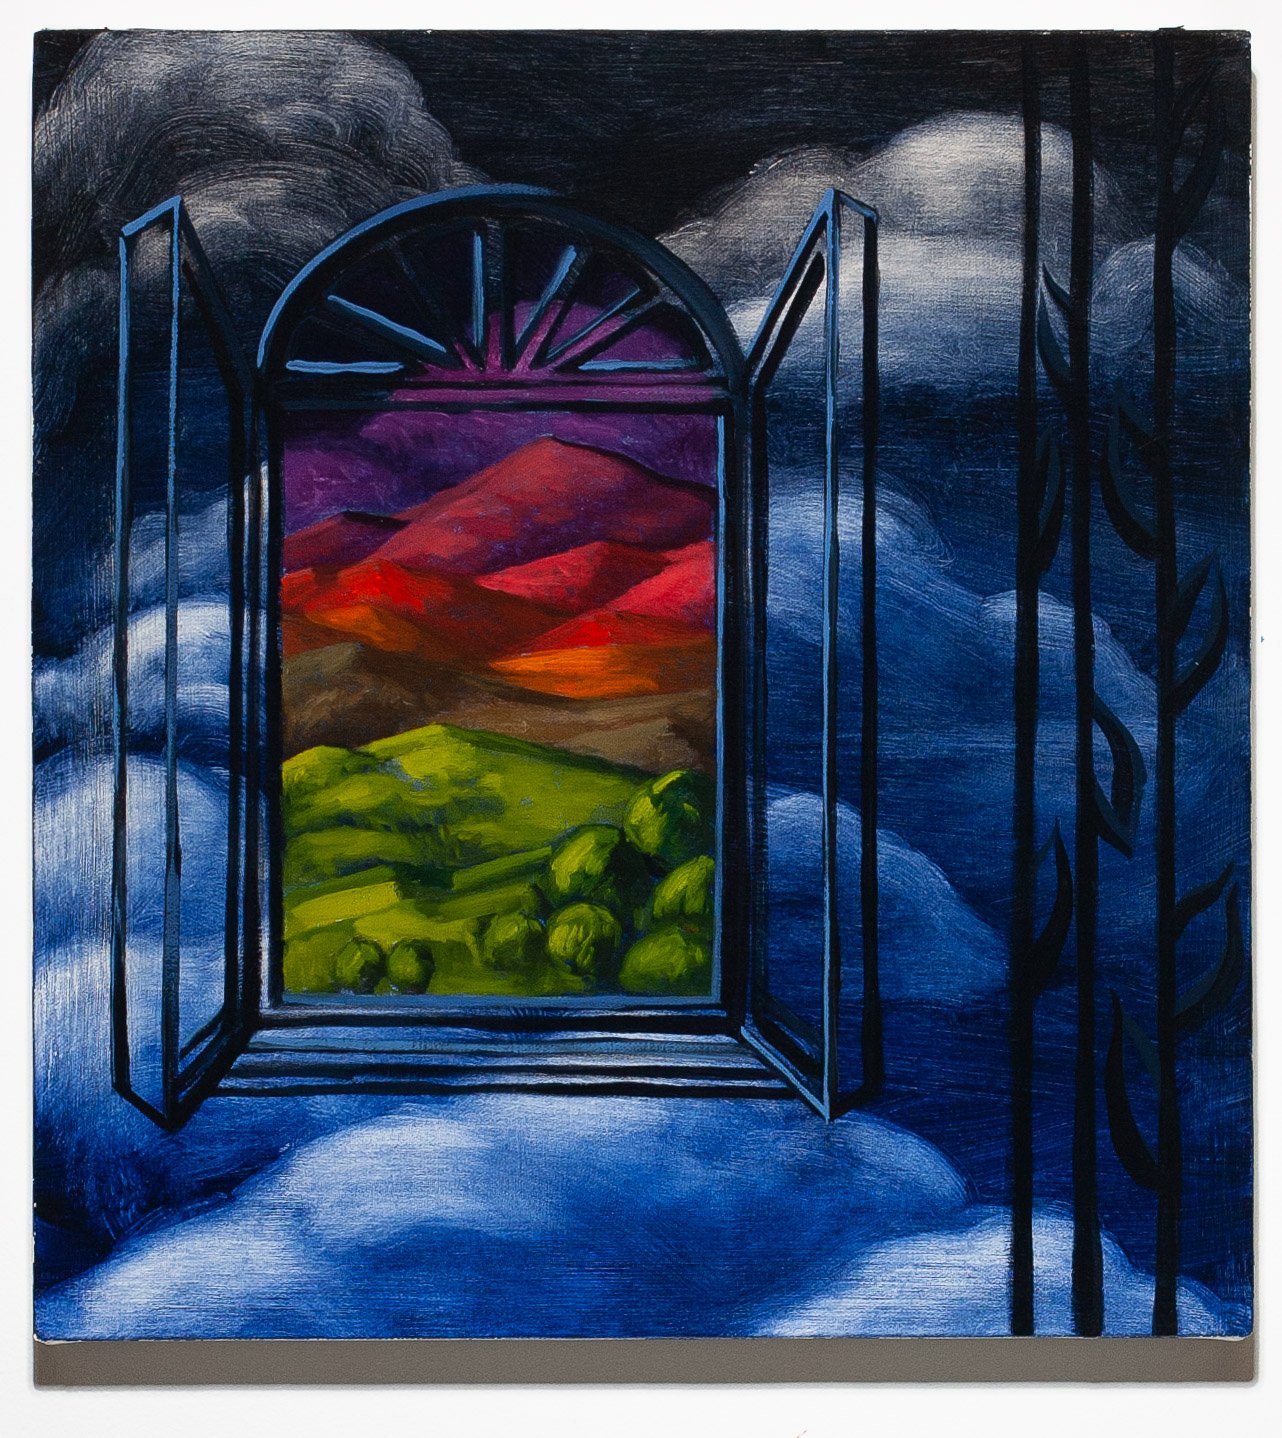   Night Window   Oil on canvas  16 X 15 inches  2023 